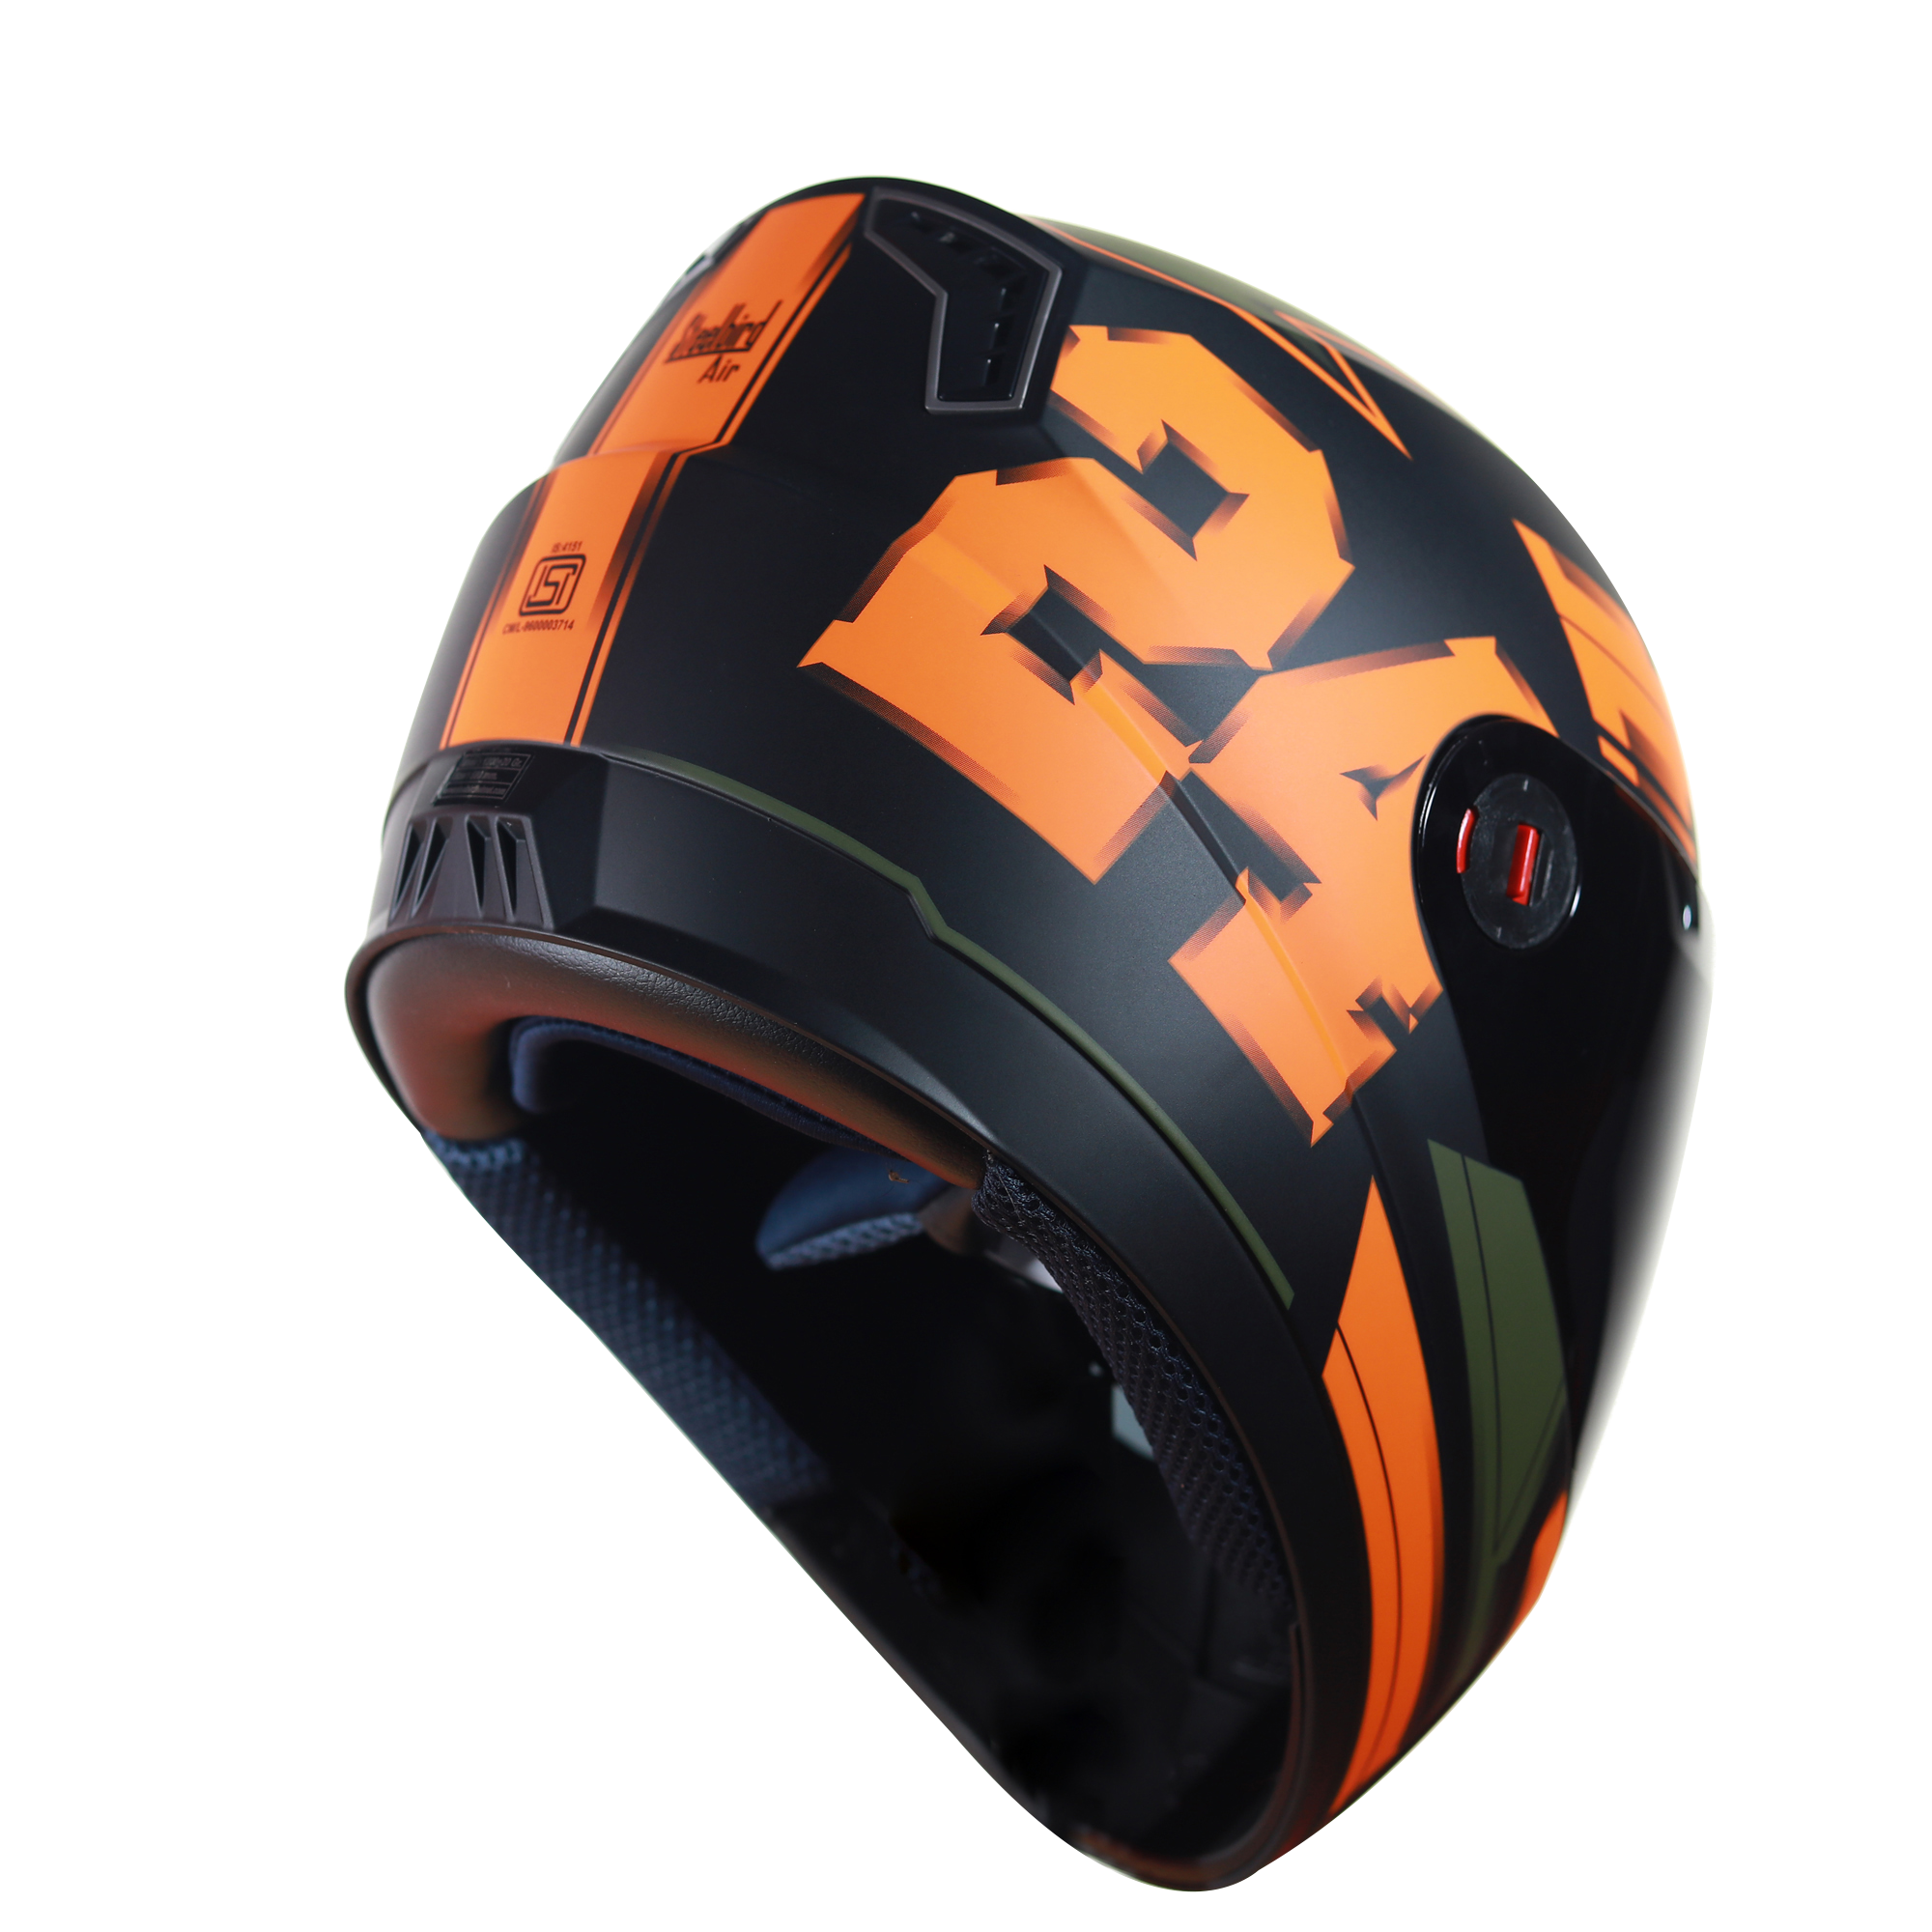 SBA-1 3D Design Mat Black With Orange And Battle Green ( Fitted With Clear Visor  Extra Smoke Visor Free)